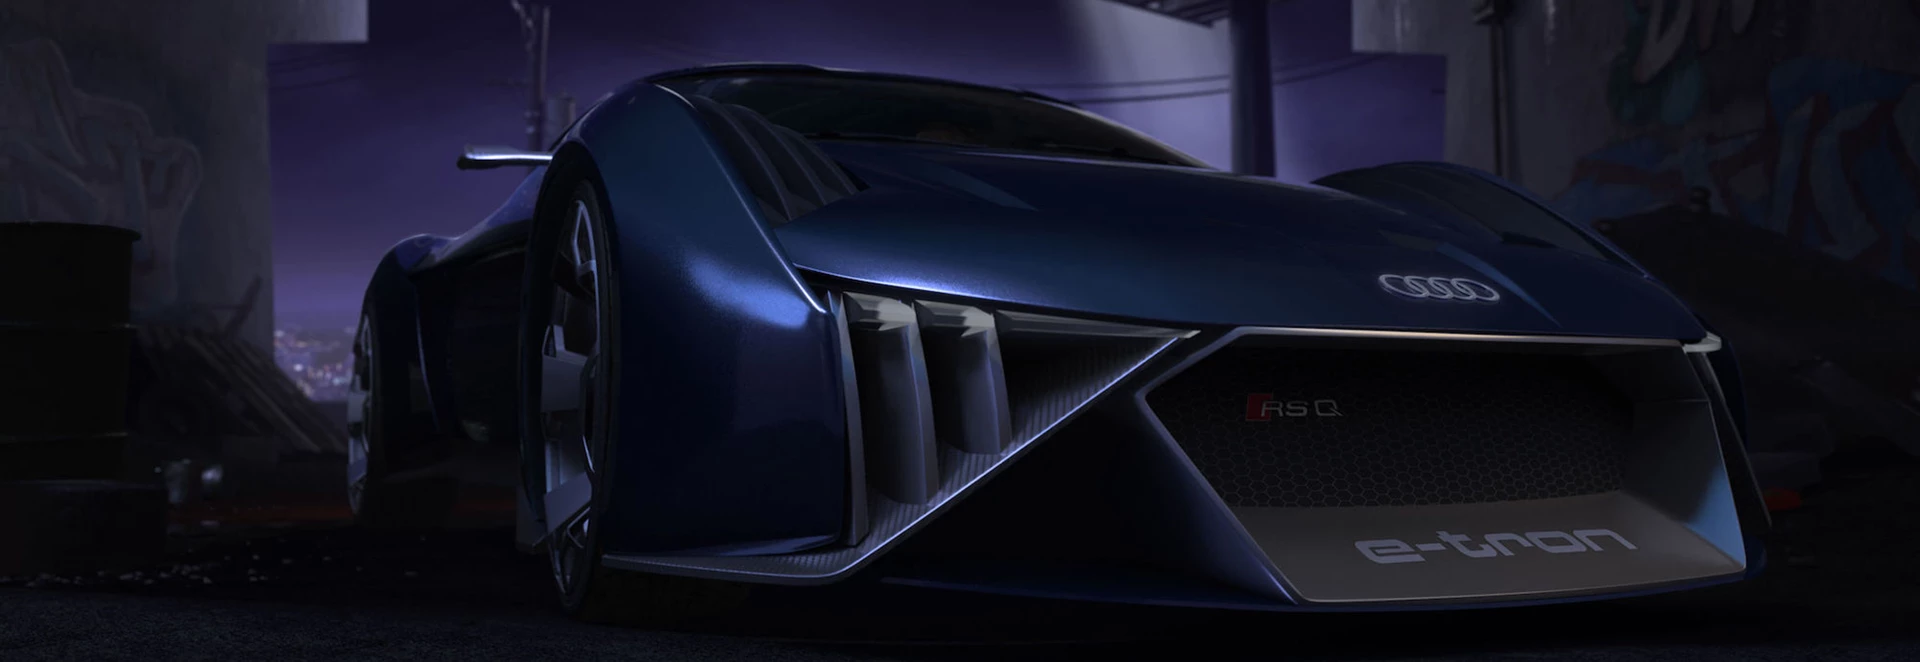 Audi produces concept for animated film